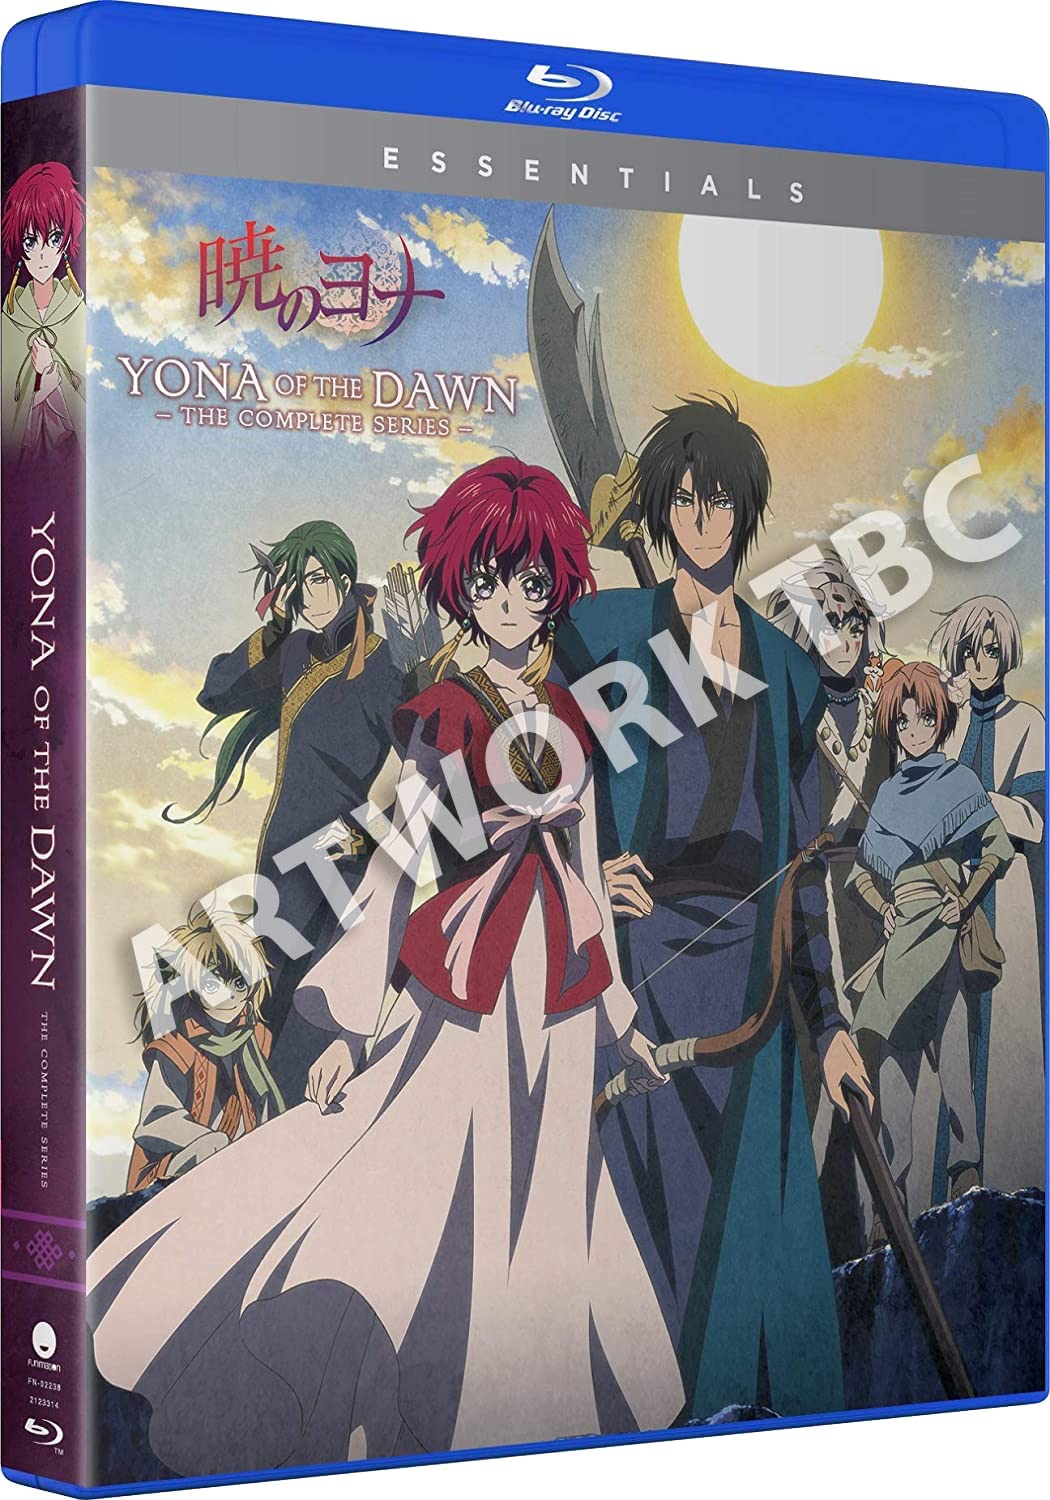 Yona of the Dawn The Complete Series [Blu-ray]